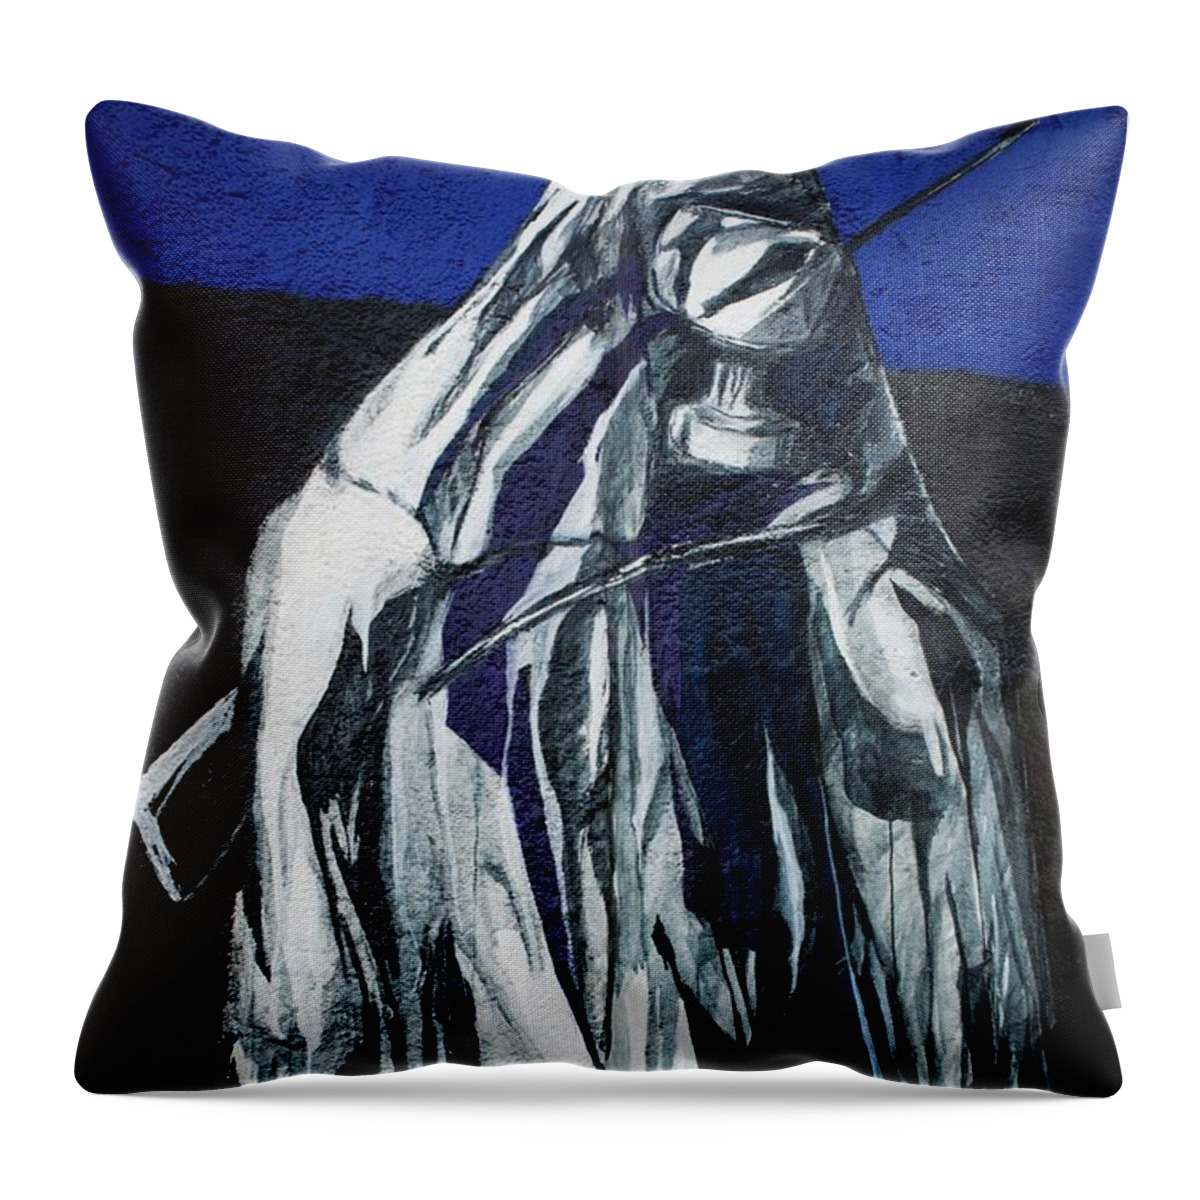 Germany Throw Pillow featuring the photograph Berlin Wall #58 by Robert Grac